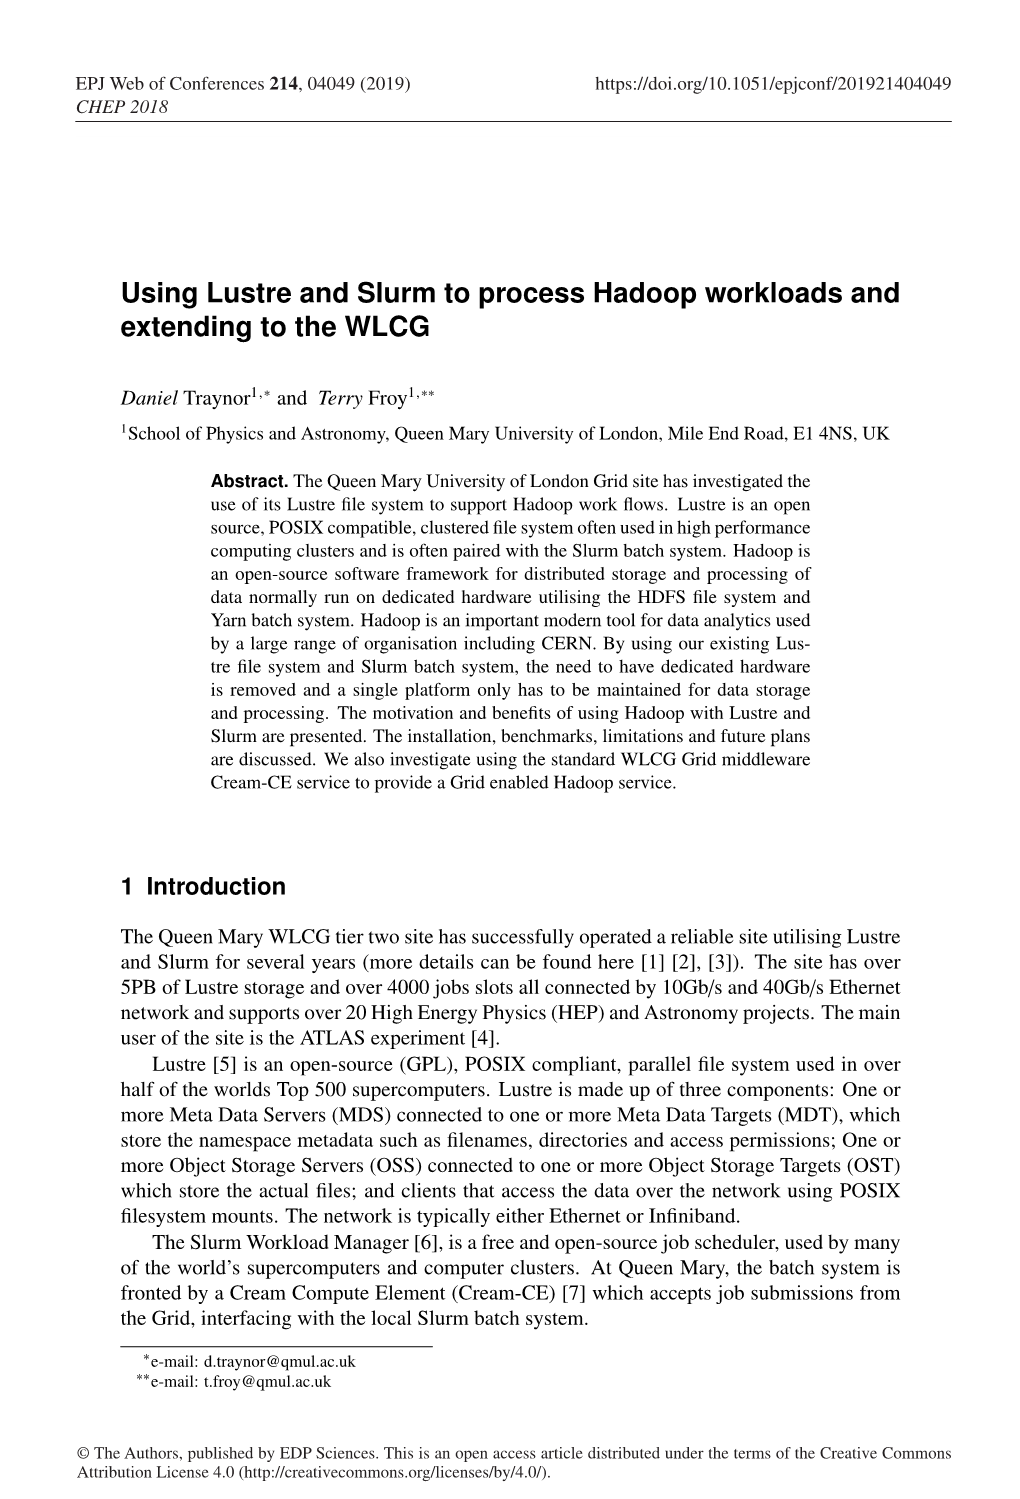 Using Lustre and Slurm to Process Hadoop Workloads and Extending to the WLCG